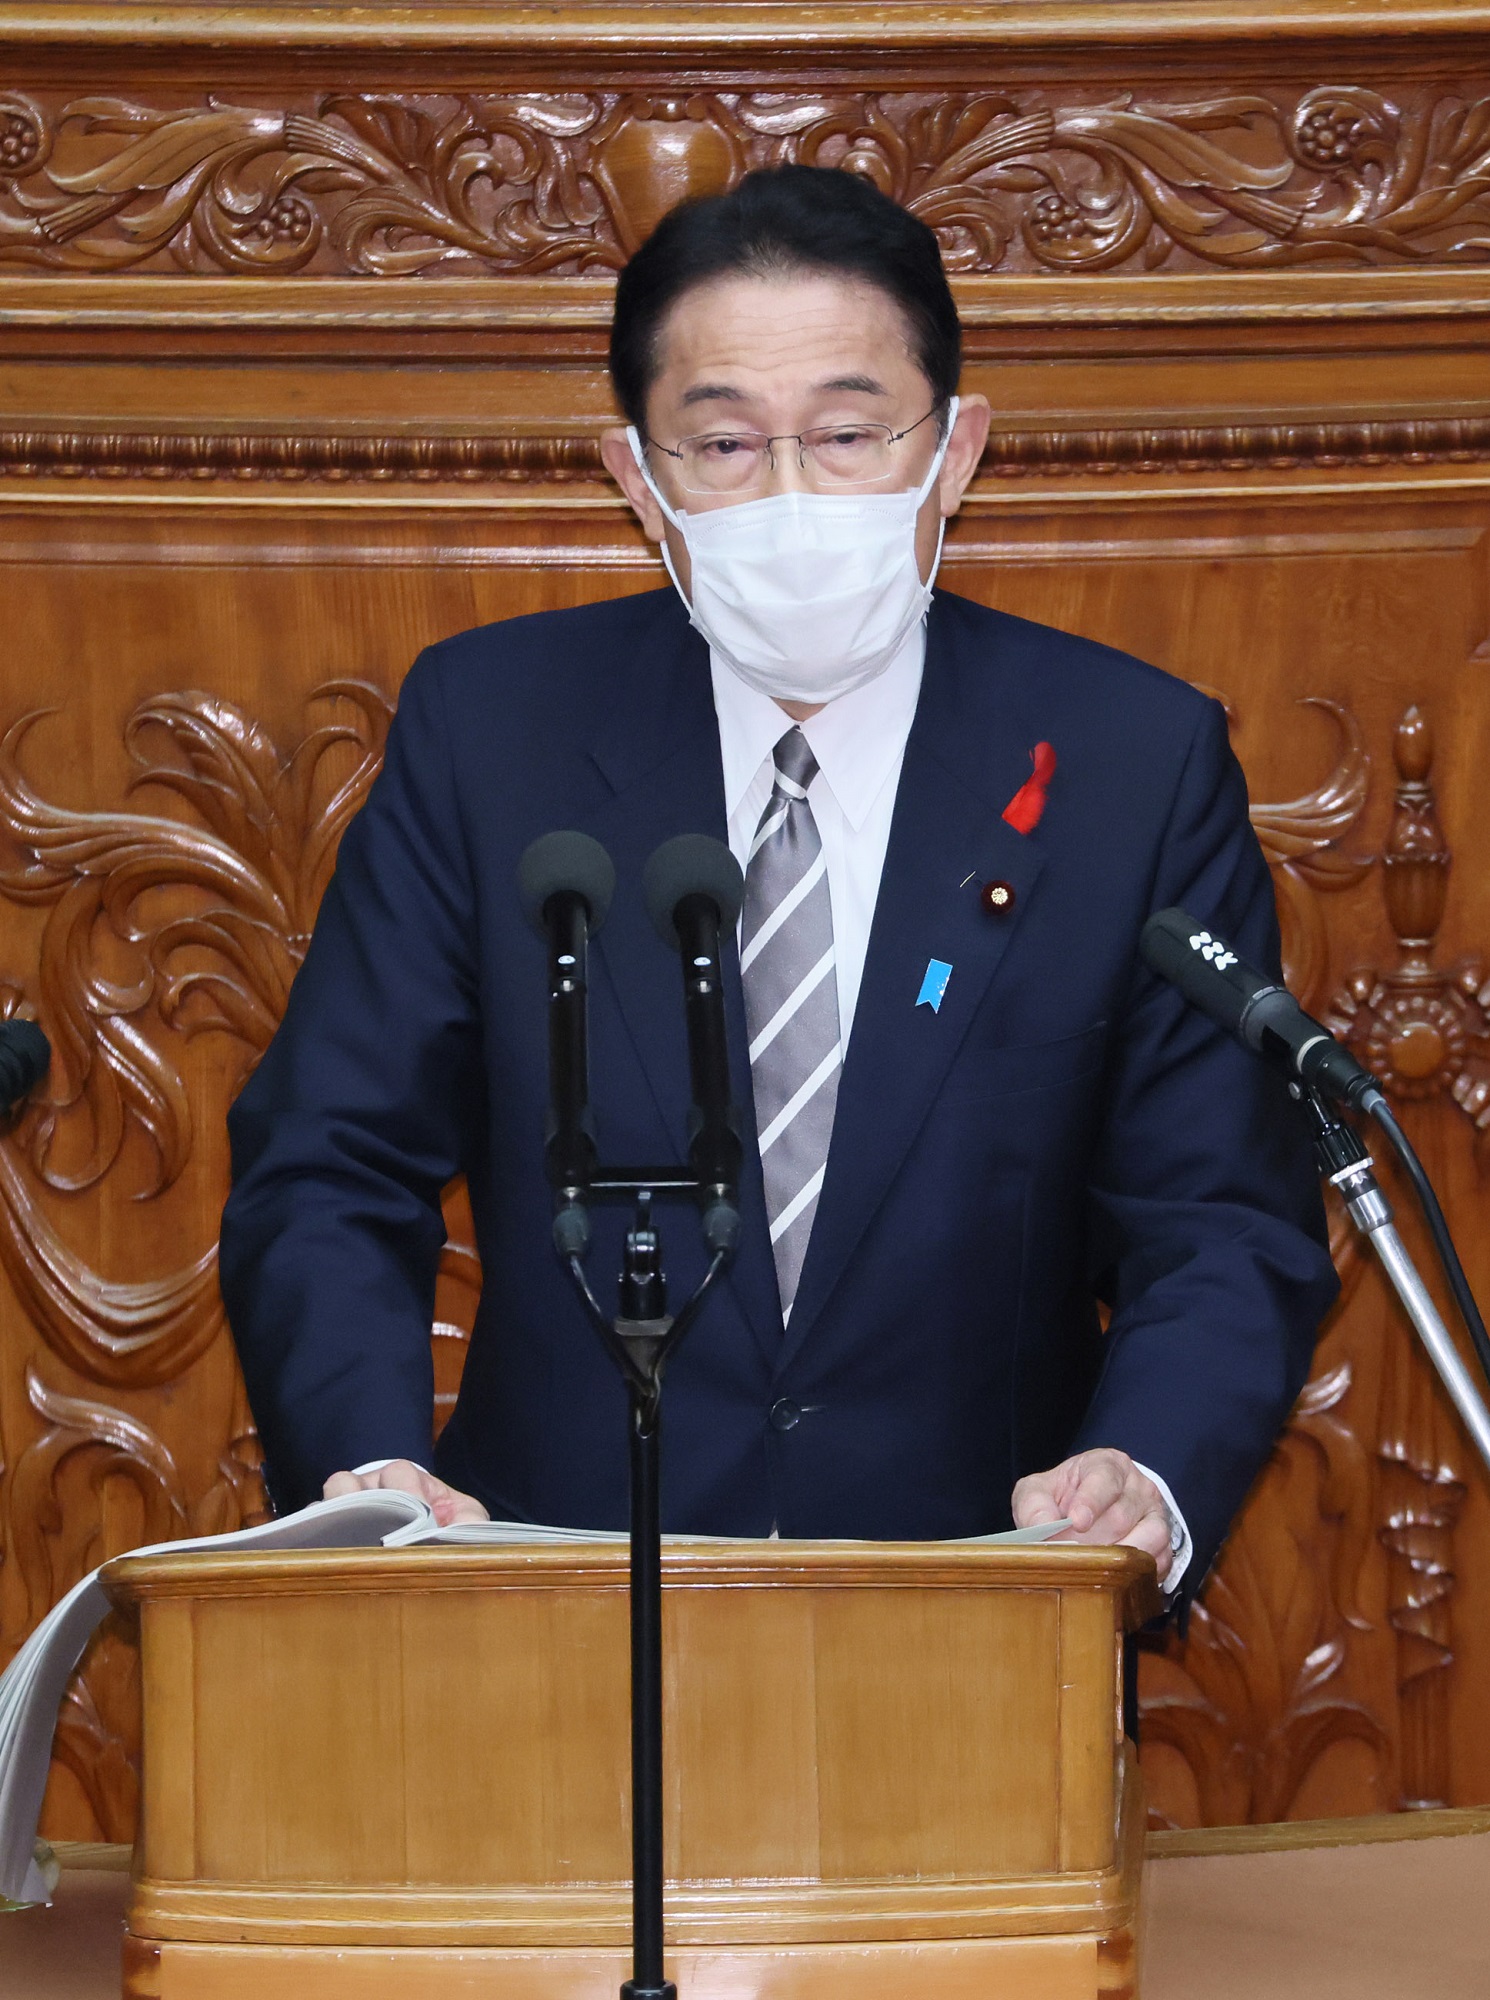 Photograph of the Prime Minister delivering a policy speech during a plenary session of the House of Representatives (6)